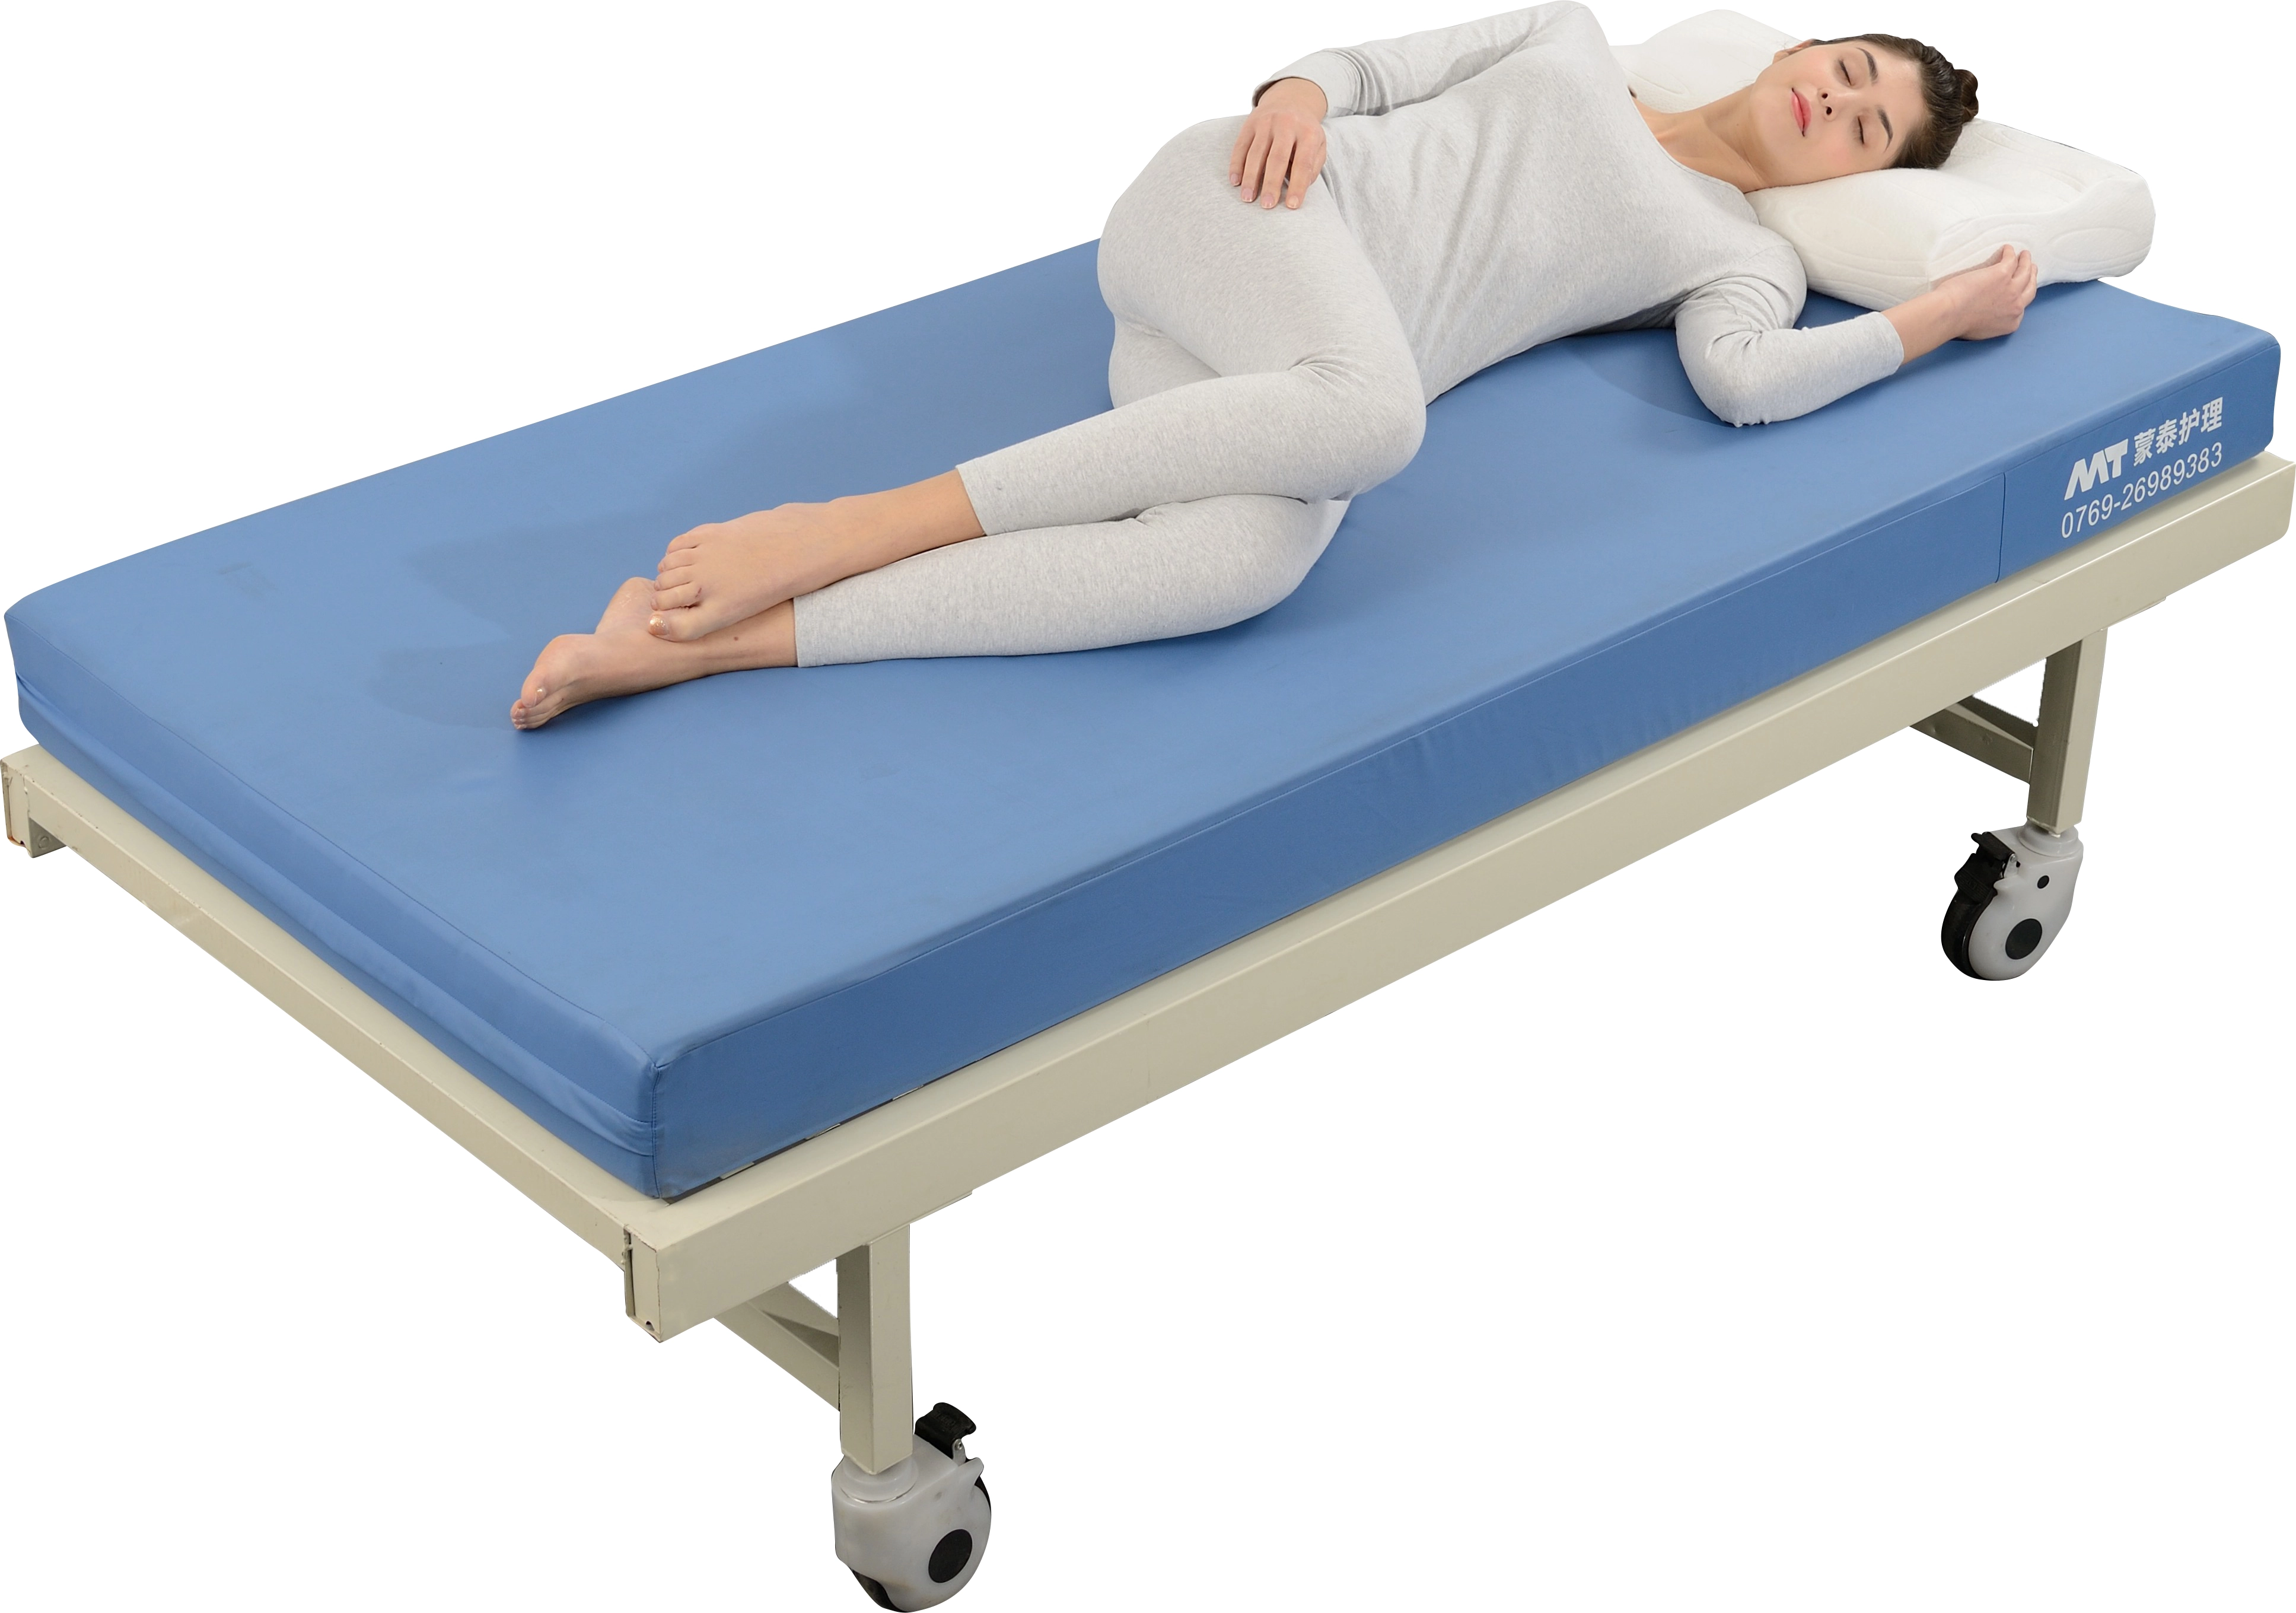 MengTai Patented Product - Static Anti-pressure Sore Mattress To Help The 84-year-old Solve The Problem of Pressure Sores